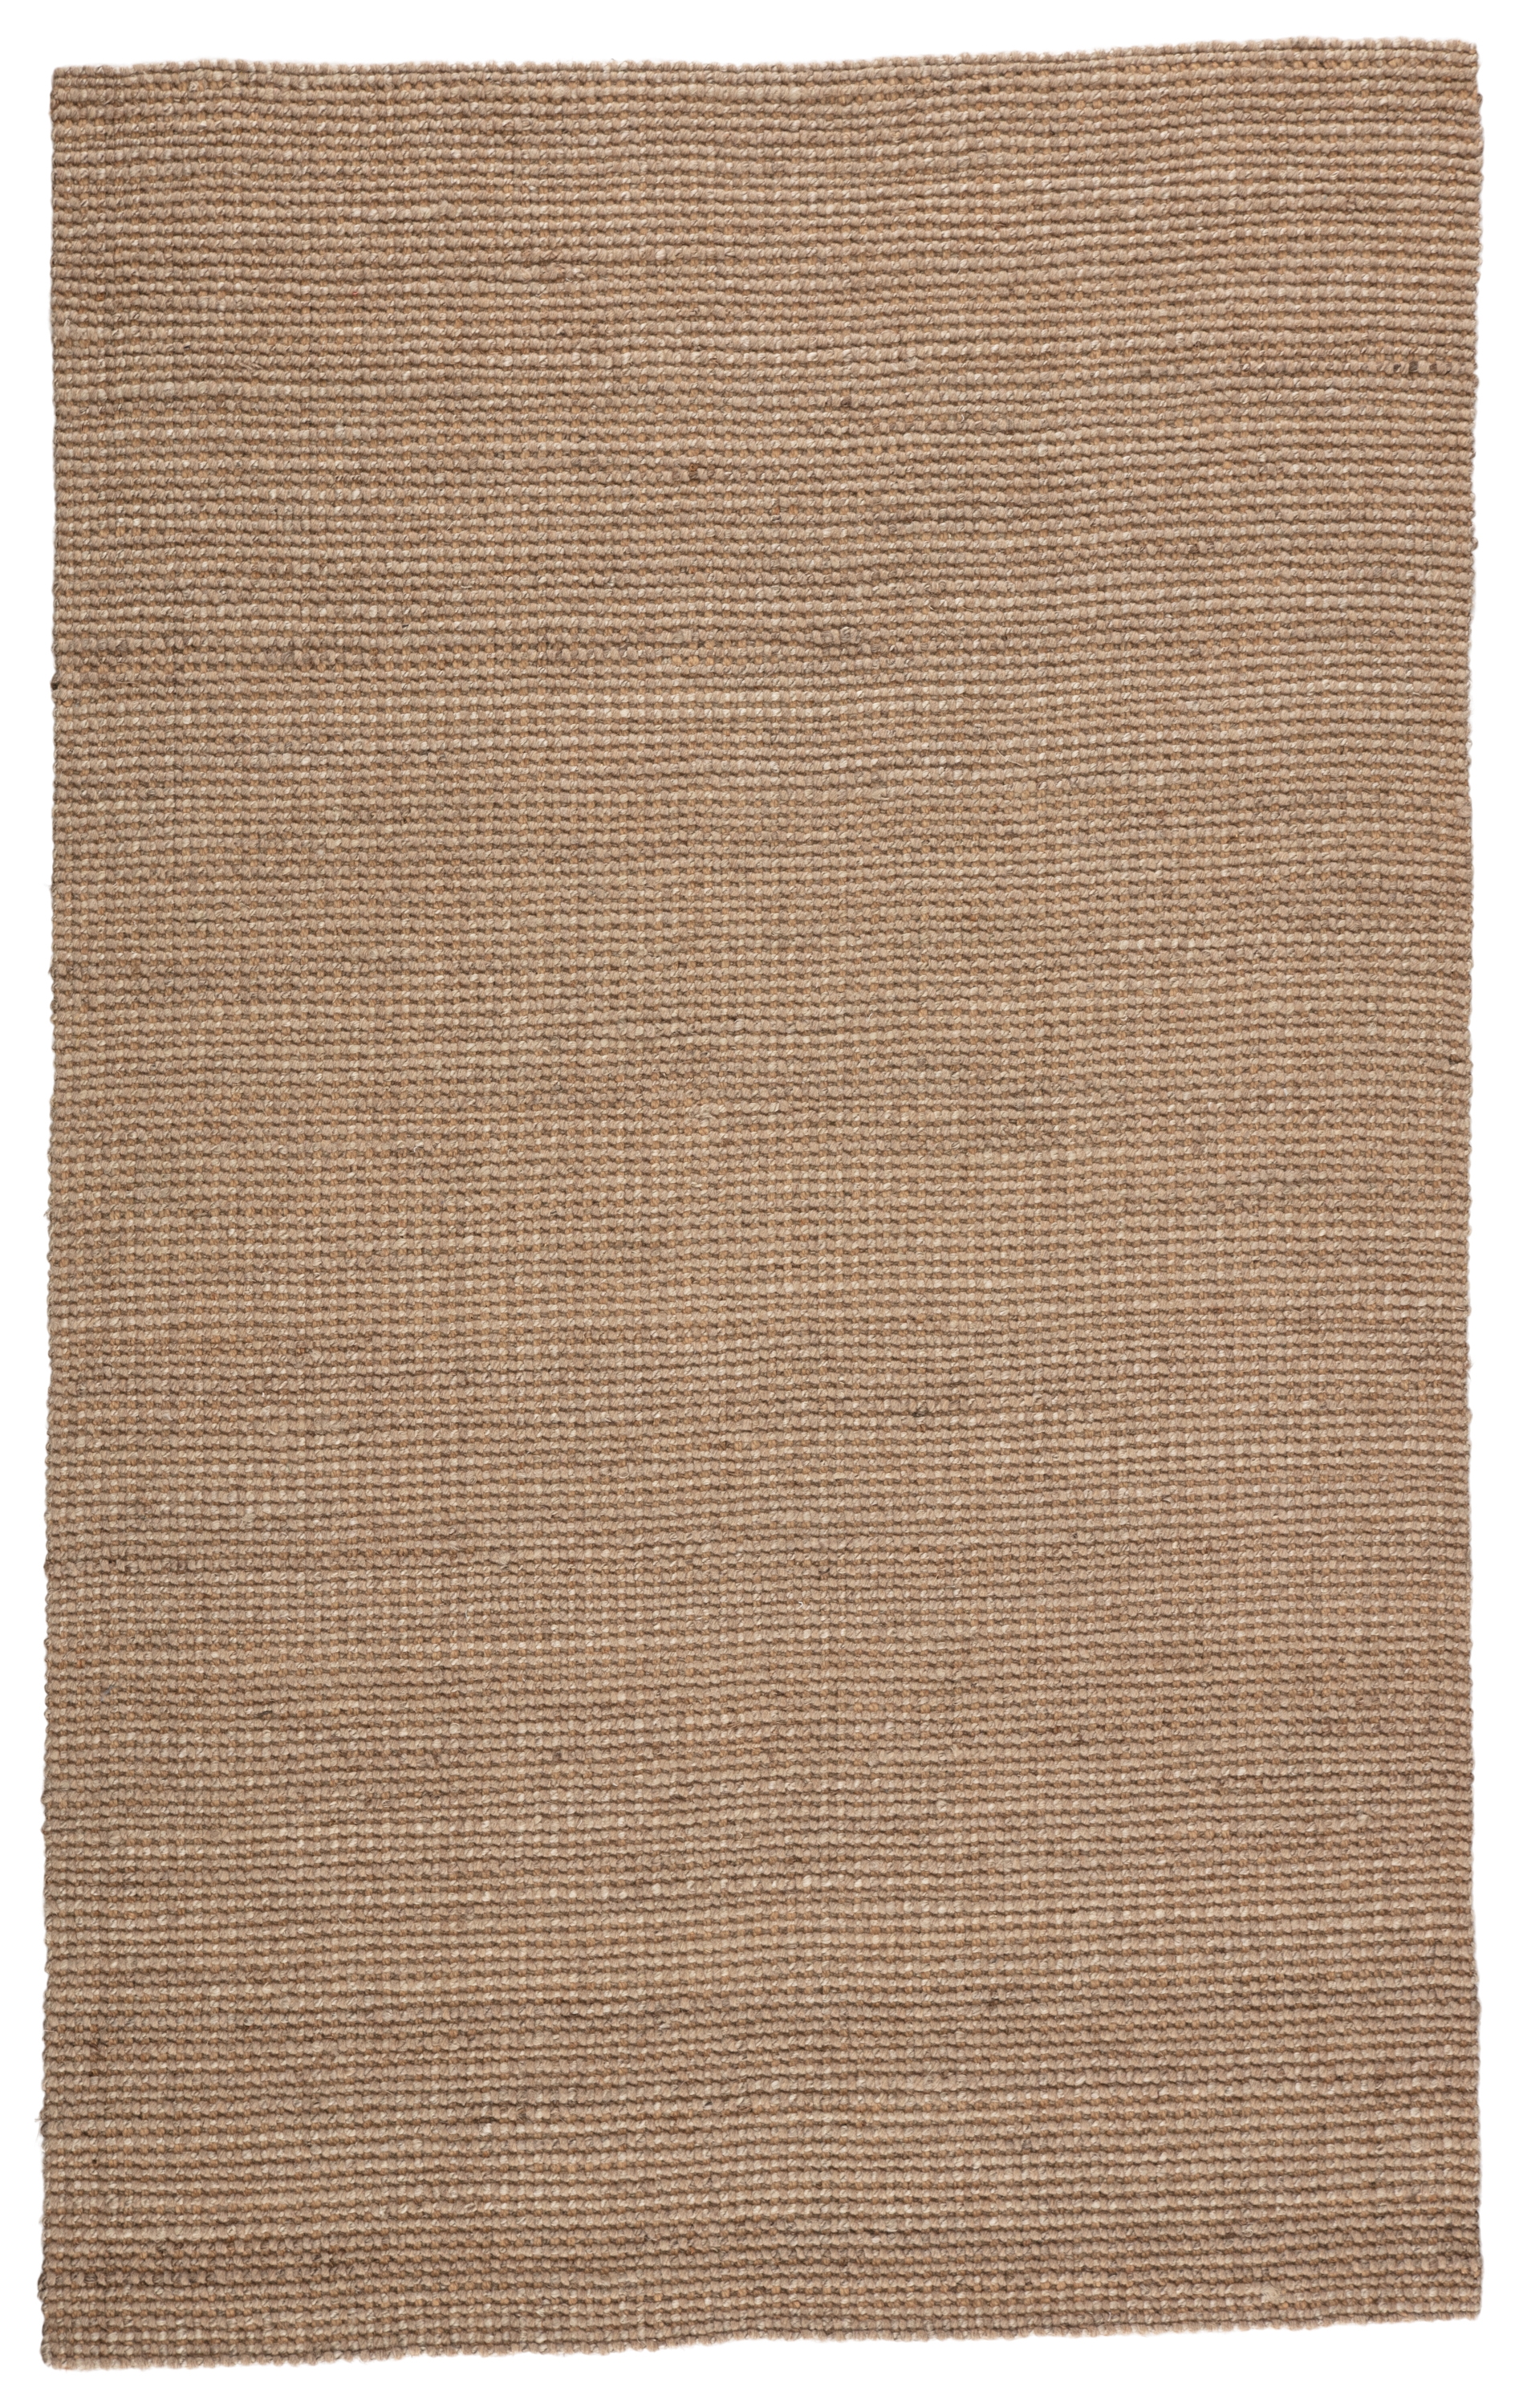 Beech Natural Solid Tan/ Taupe Area Rug (9'X12') - Image 0